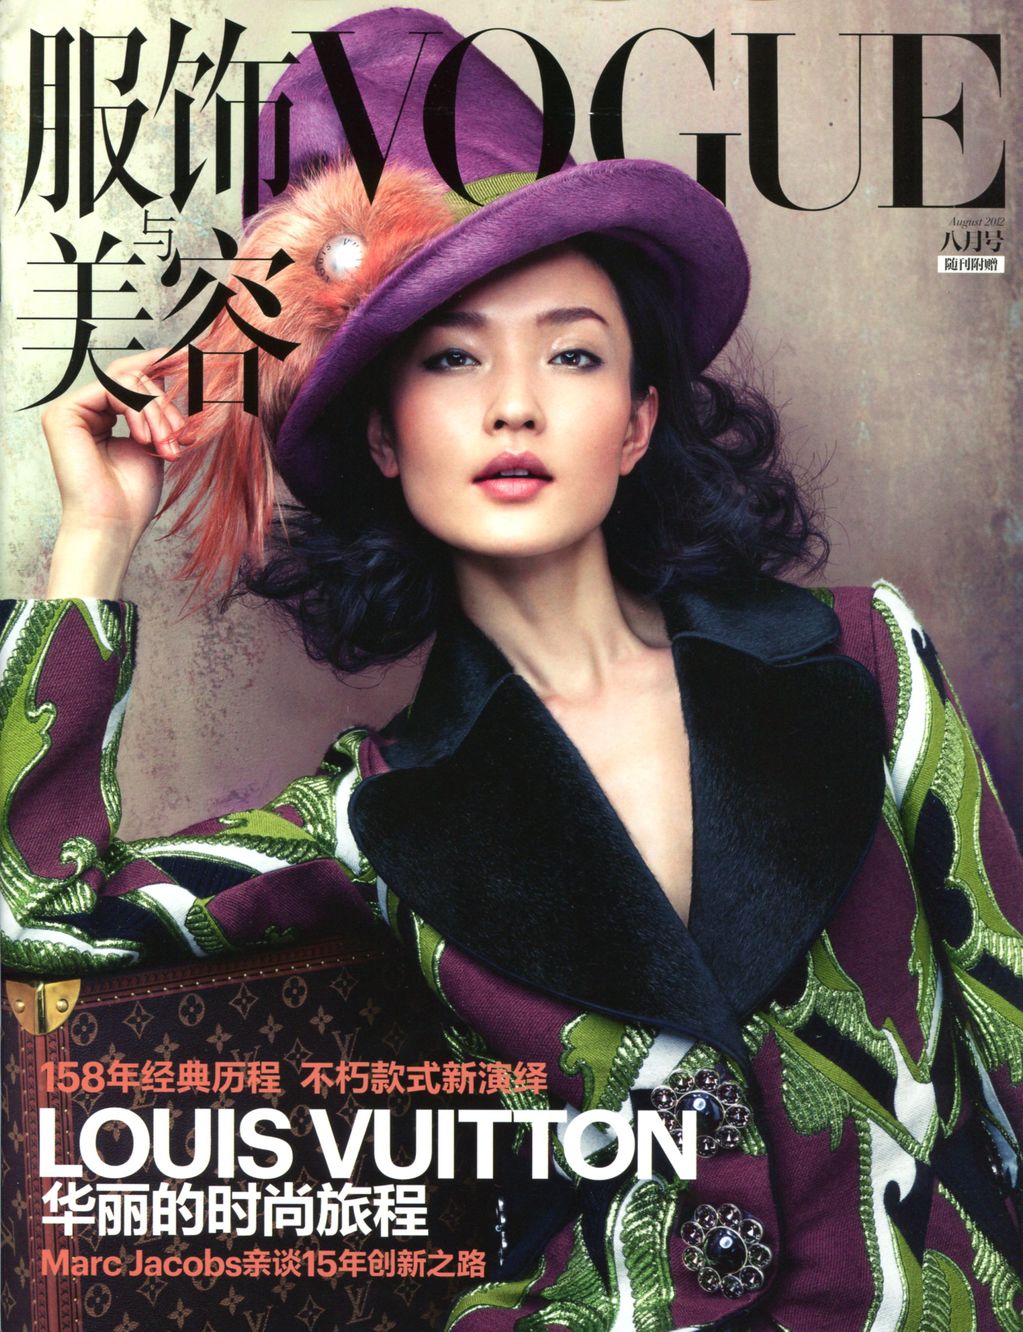 ASIAN MODELS BLOG: MAGAZINE COVER & EDITORIAL: Du Juan in Vogue China  Supplement, August 2012